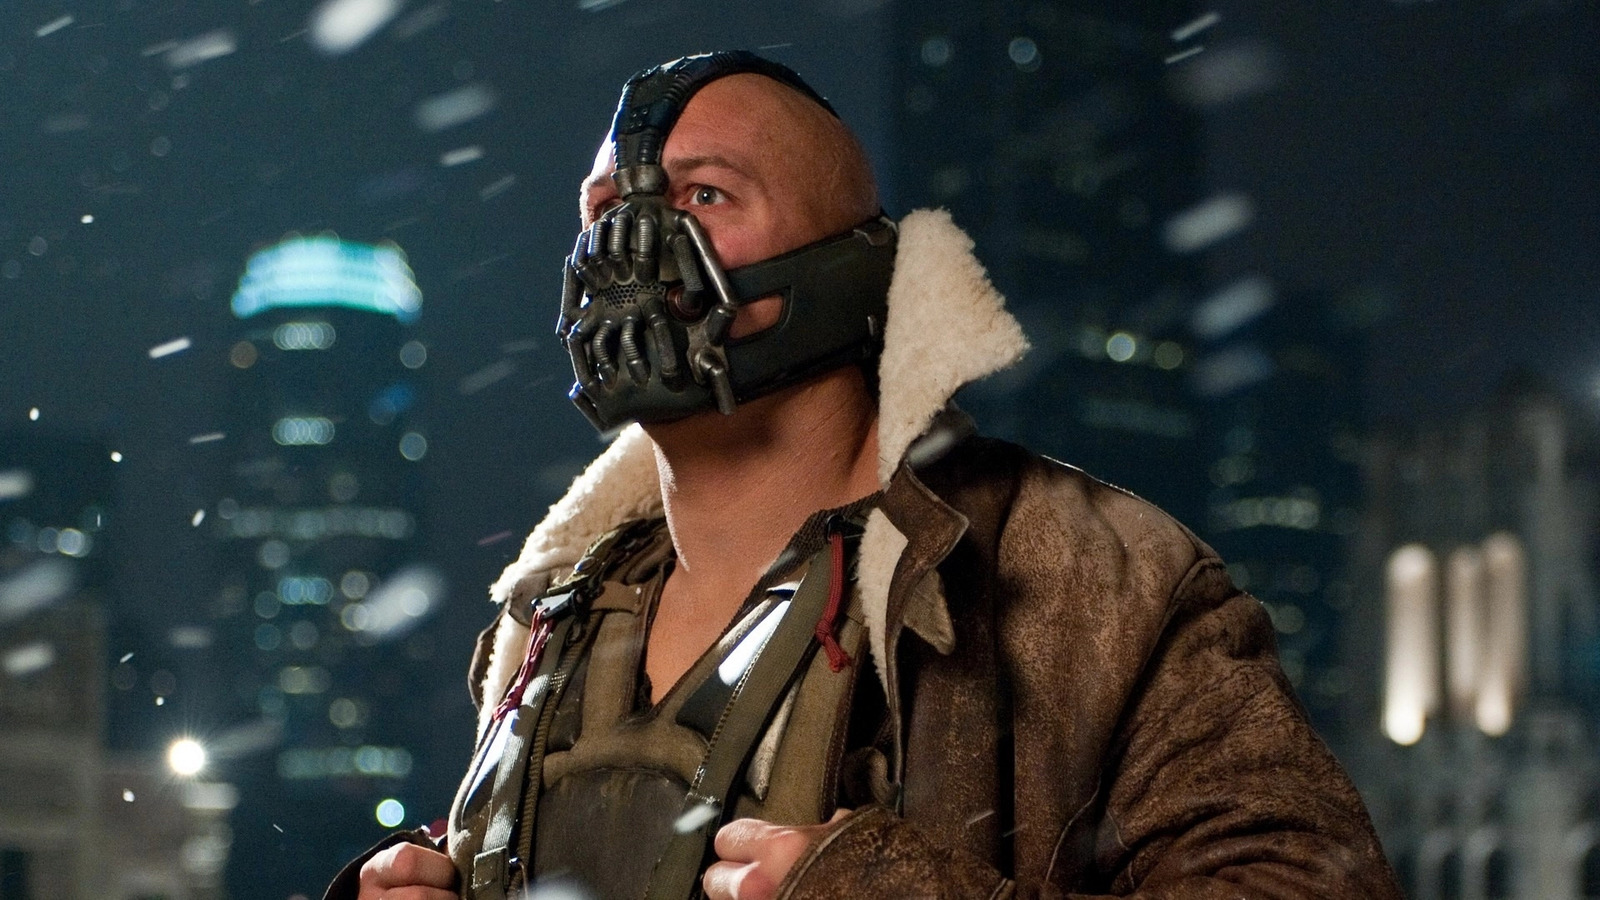 Tom Hardy Based Bane's Voice In The Dark Knight Rises On A Real-Life Legend